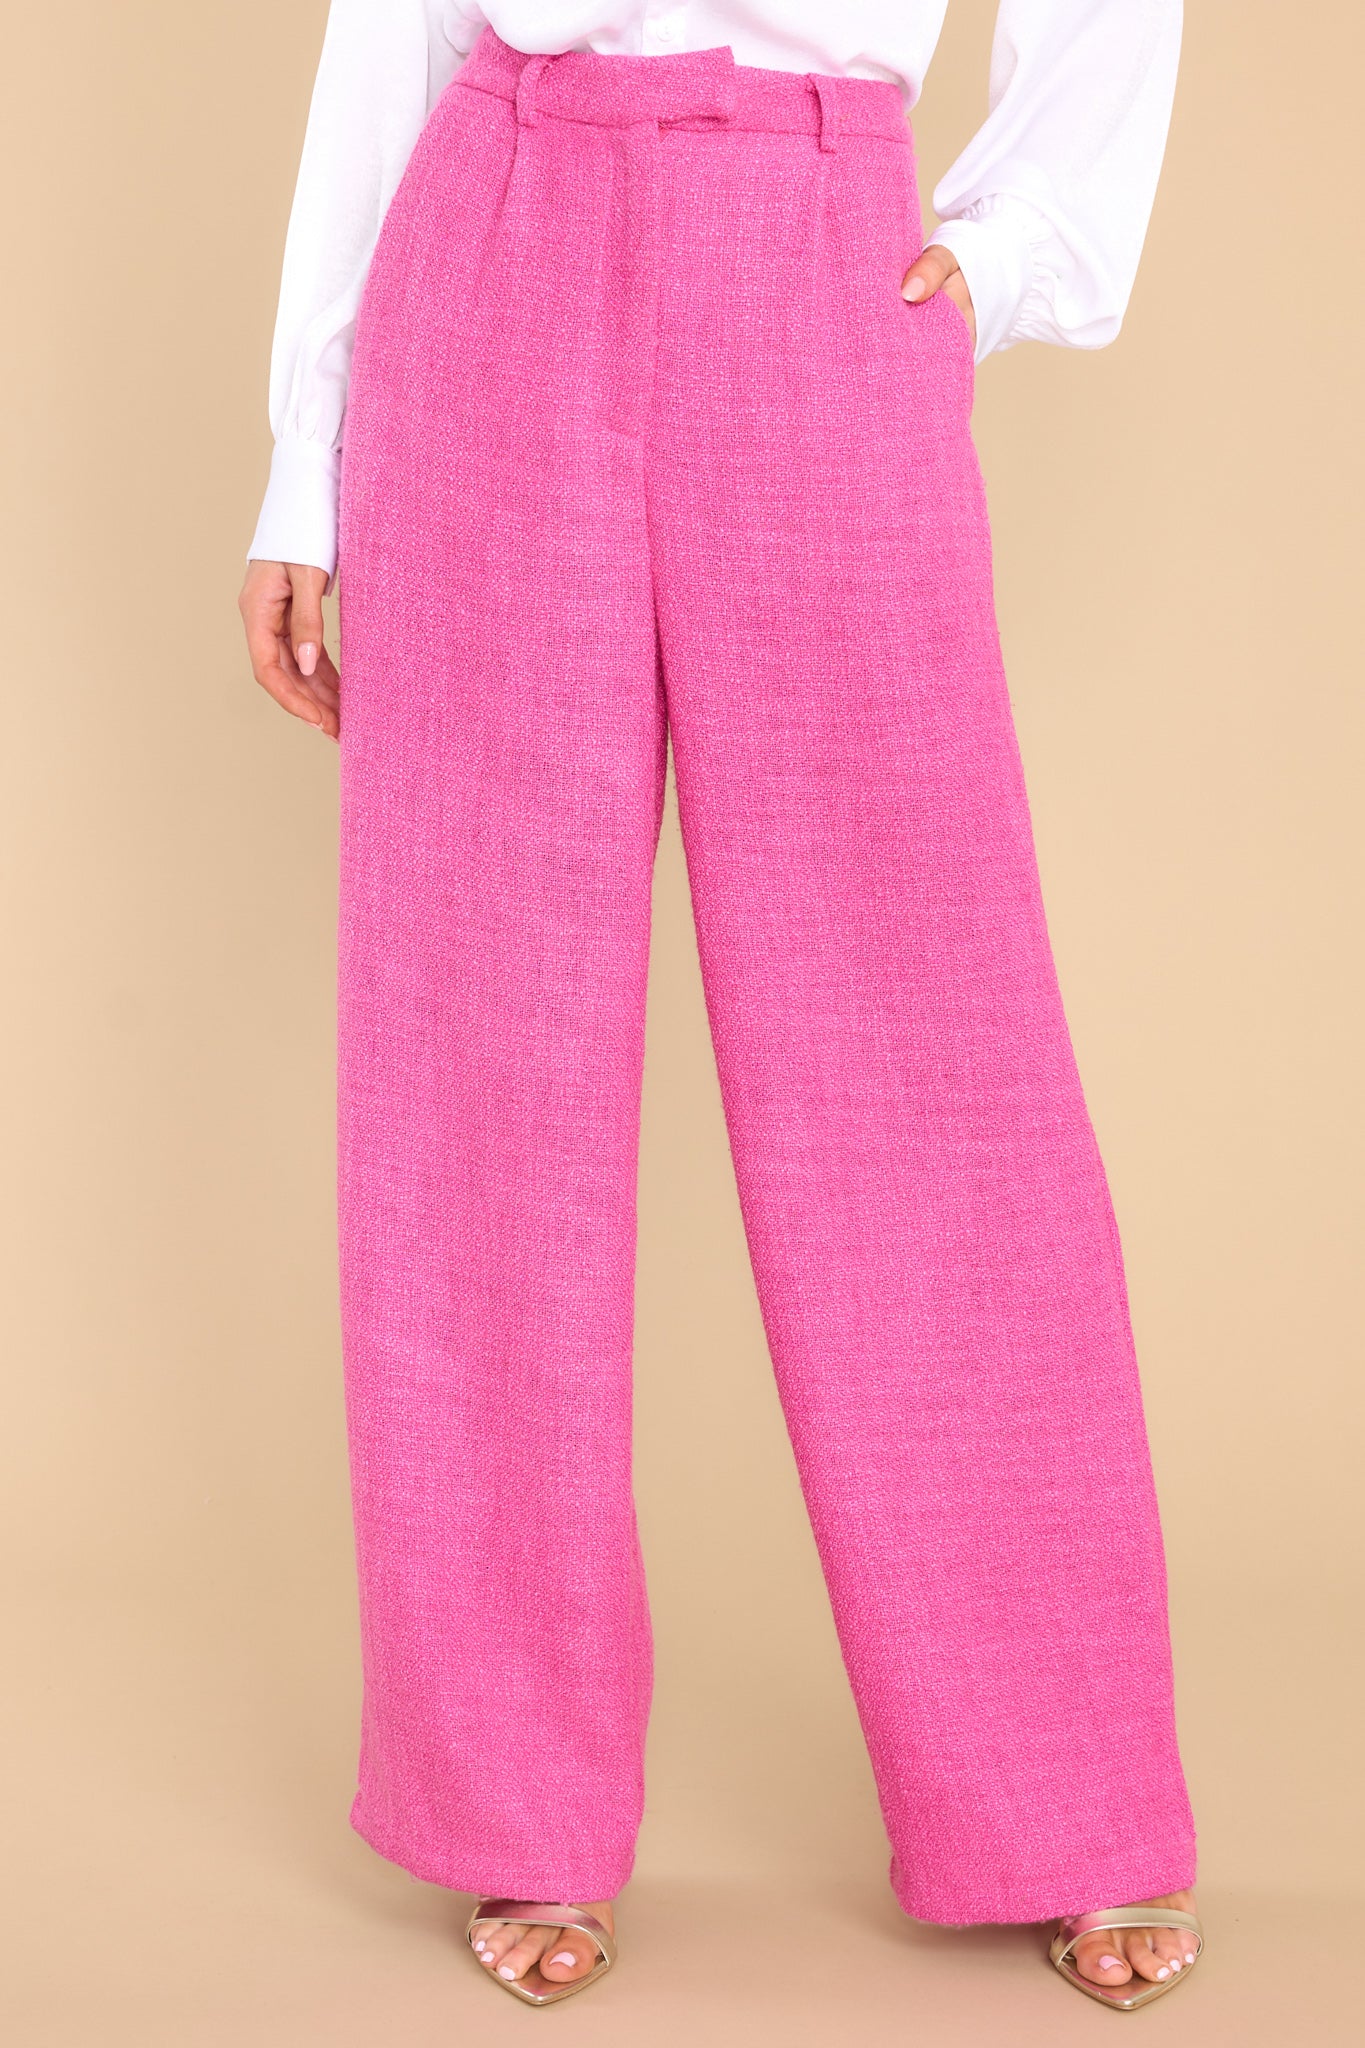 These hot pink pants feature a high waist, a hook and eye and zipper closure, functional belt loops, two functional front pockets, a faux back pocket, and a wide leg.